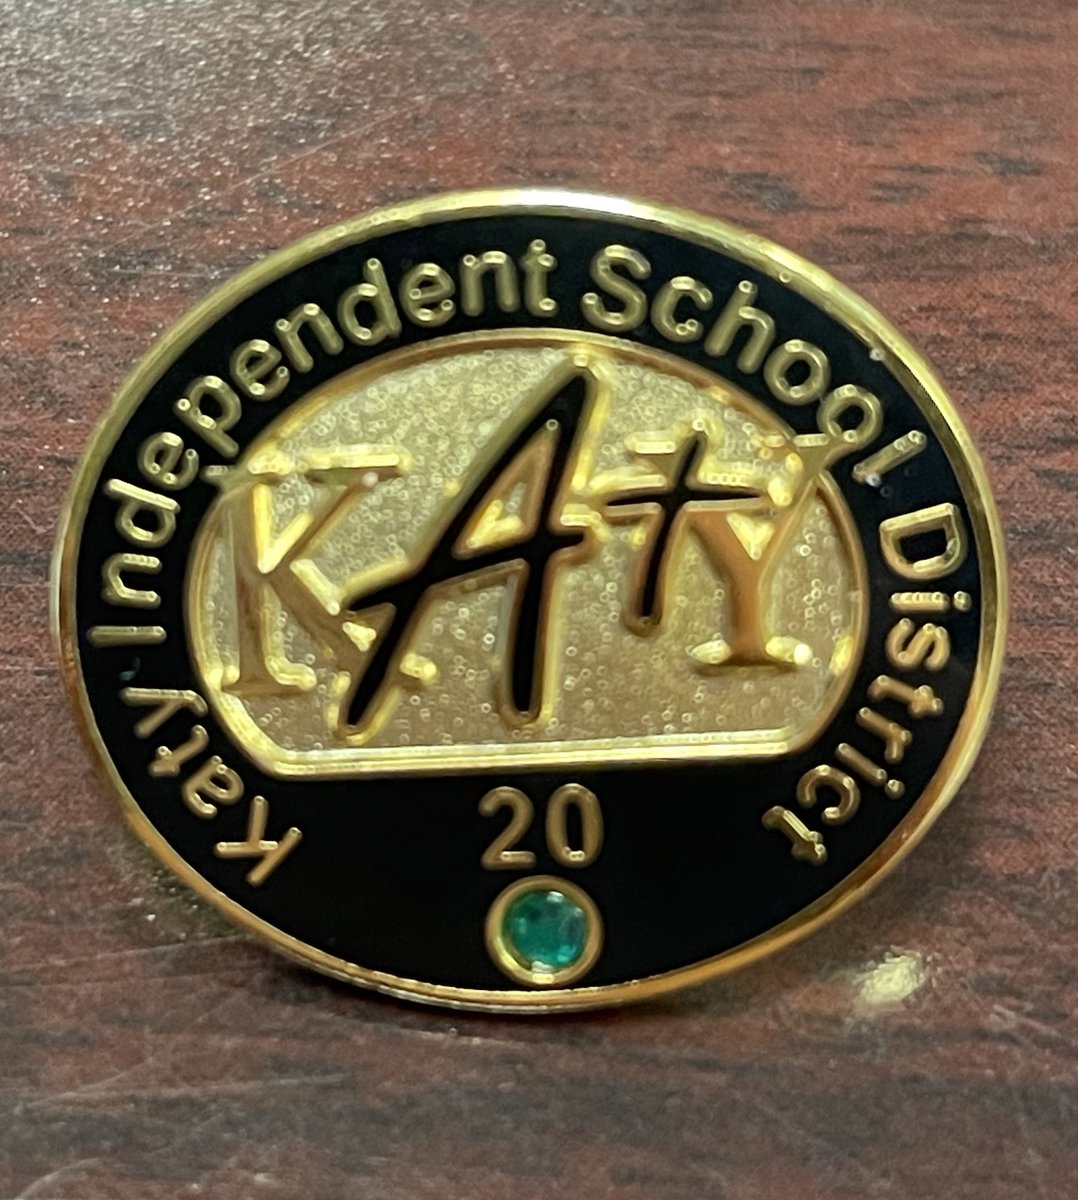 While the last few weeks have been some of the toughest of my 20 years (IYKYK), I’m pretty proud of this pin. Love my math family!!! Also, I started teaching when I was 15. 😂